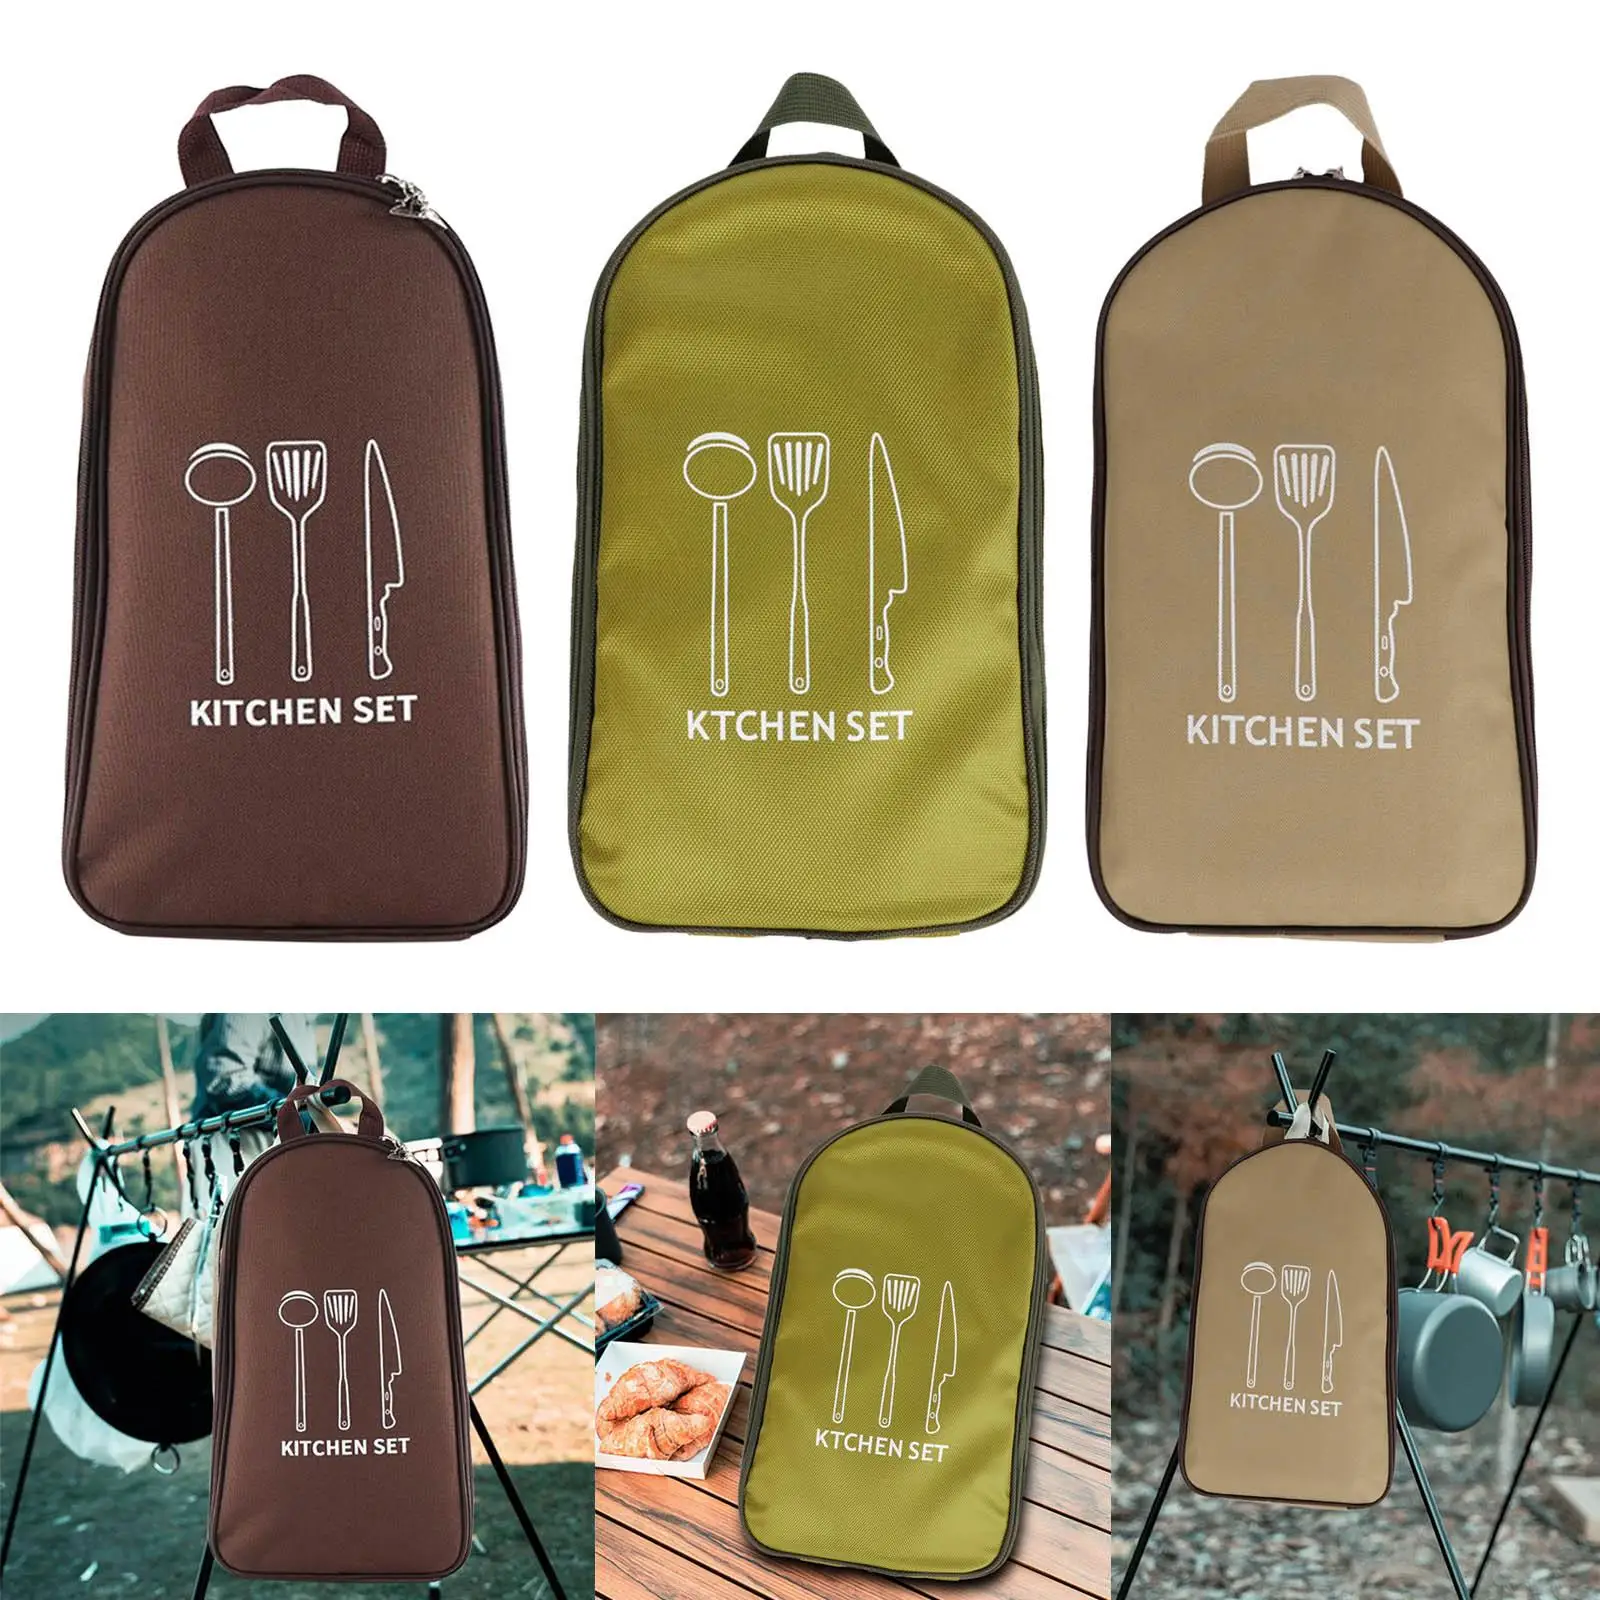 Portable Cooking Utensils Organizer Bag Compact for Camping Travel Grill